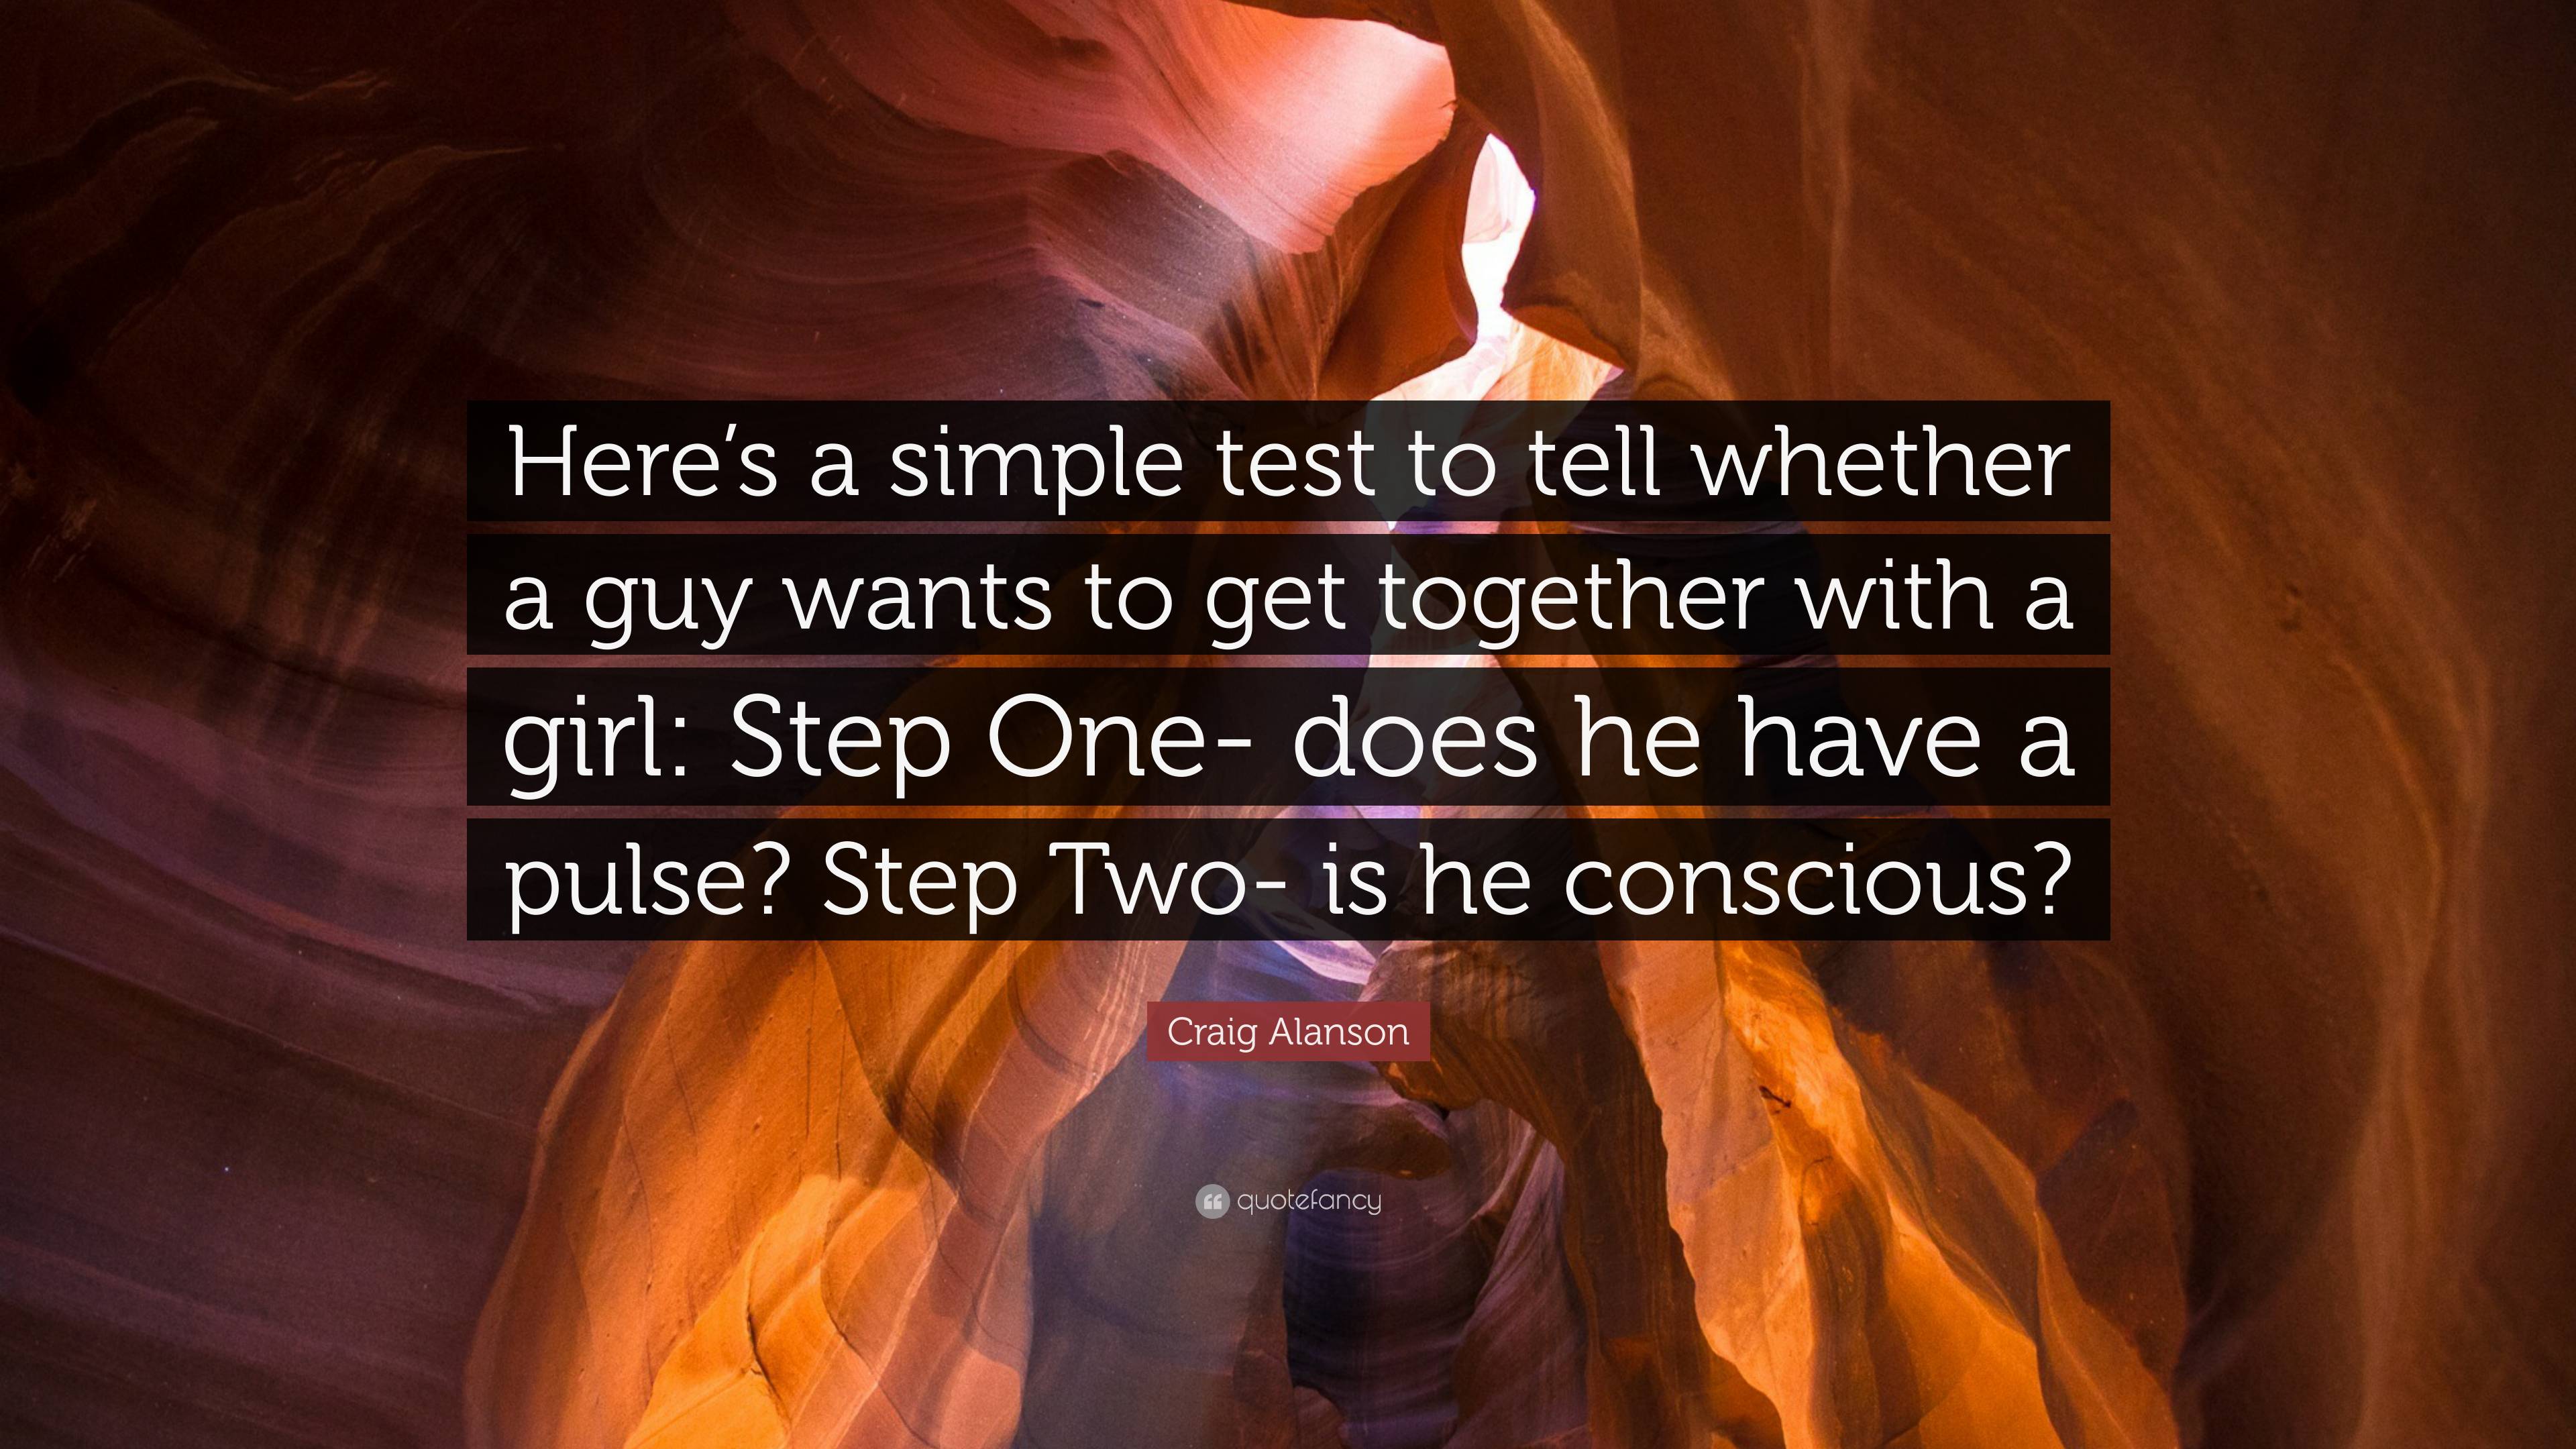 Craig Alanson Quote: “Here's a simple test to tell whether a guy wants to  get together with a girl: Step One- does he have a pulse? Step Two- ”